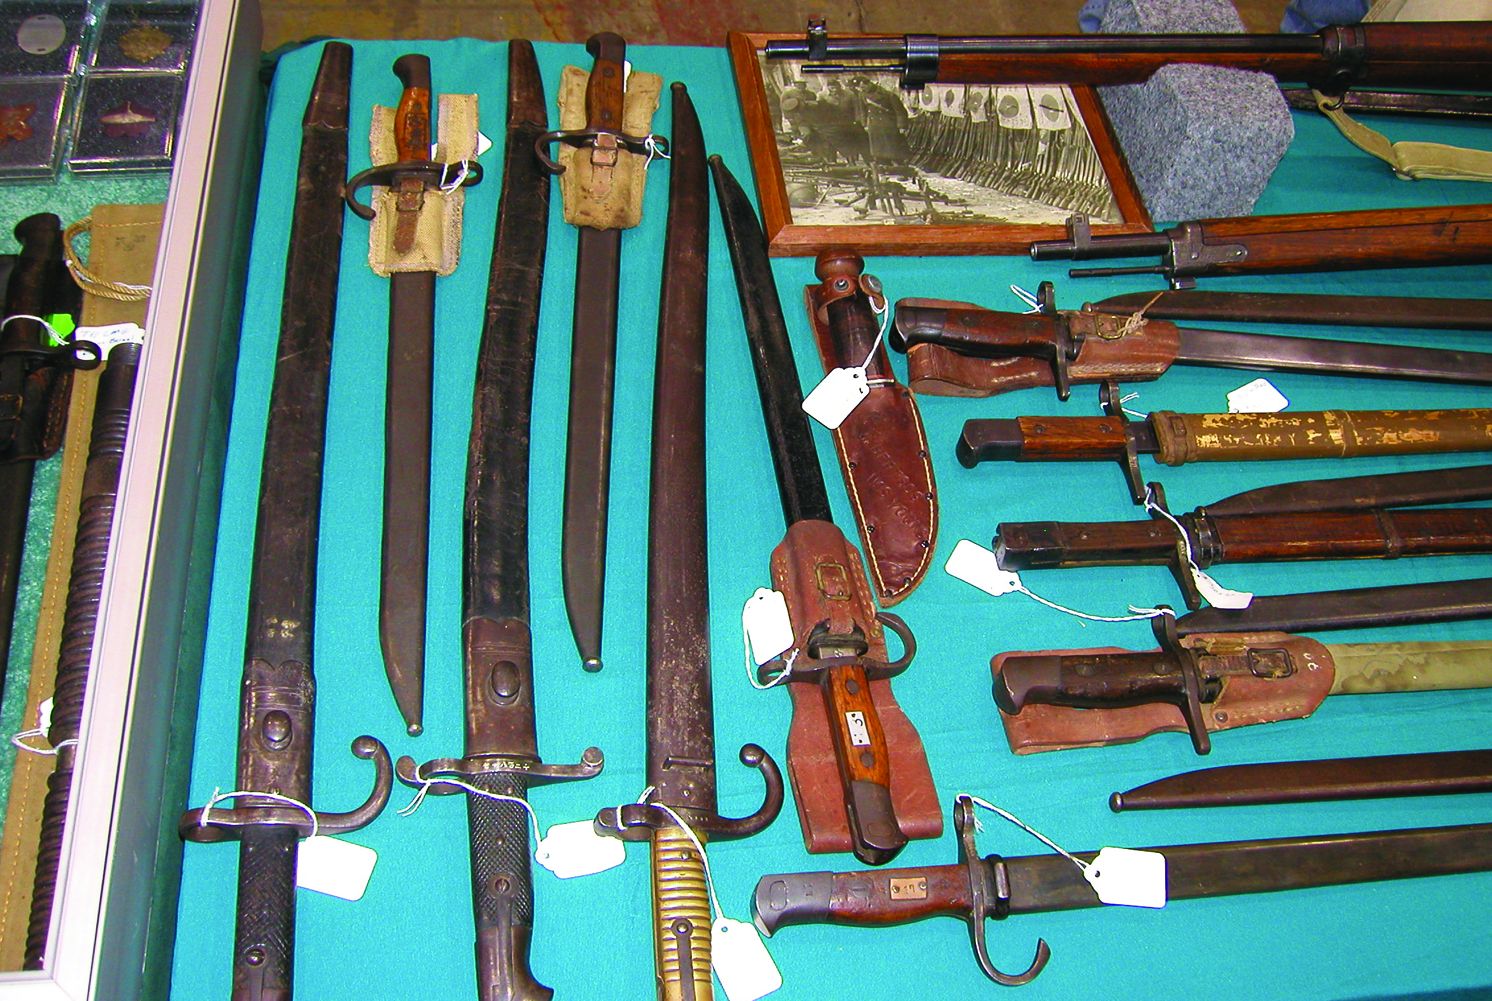 An excellent selection of Japanese bayonets was available from Eric Doody, notable dealer of Japanese militaria.